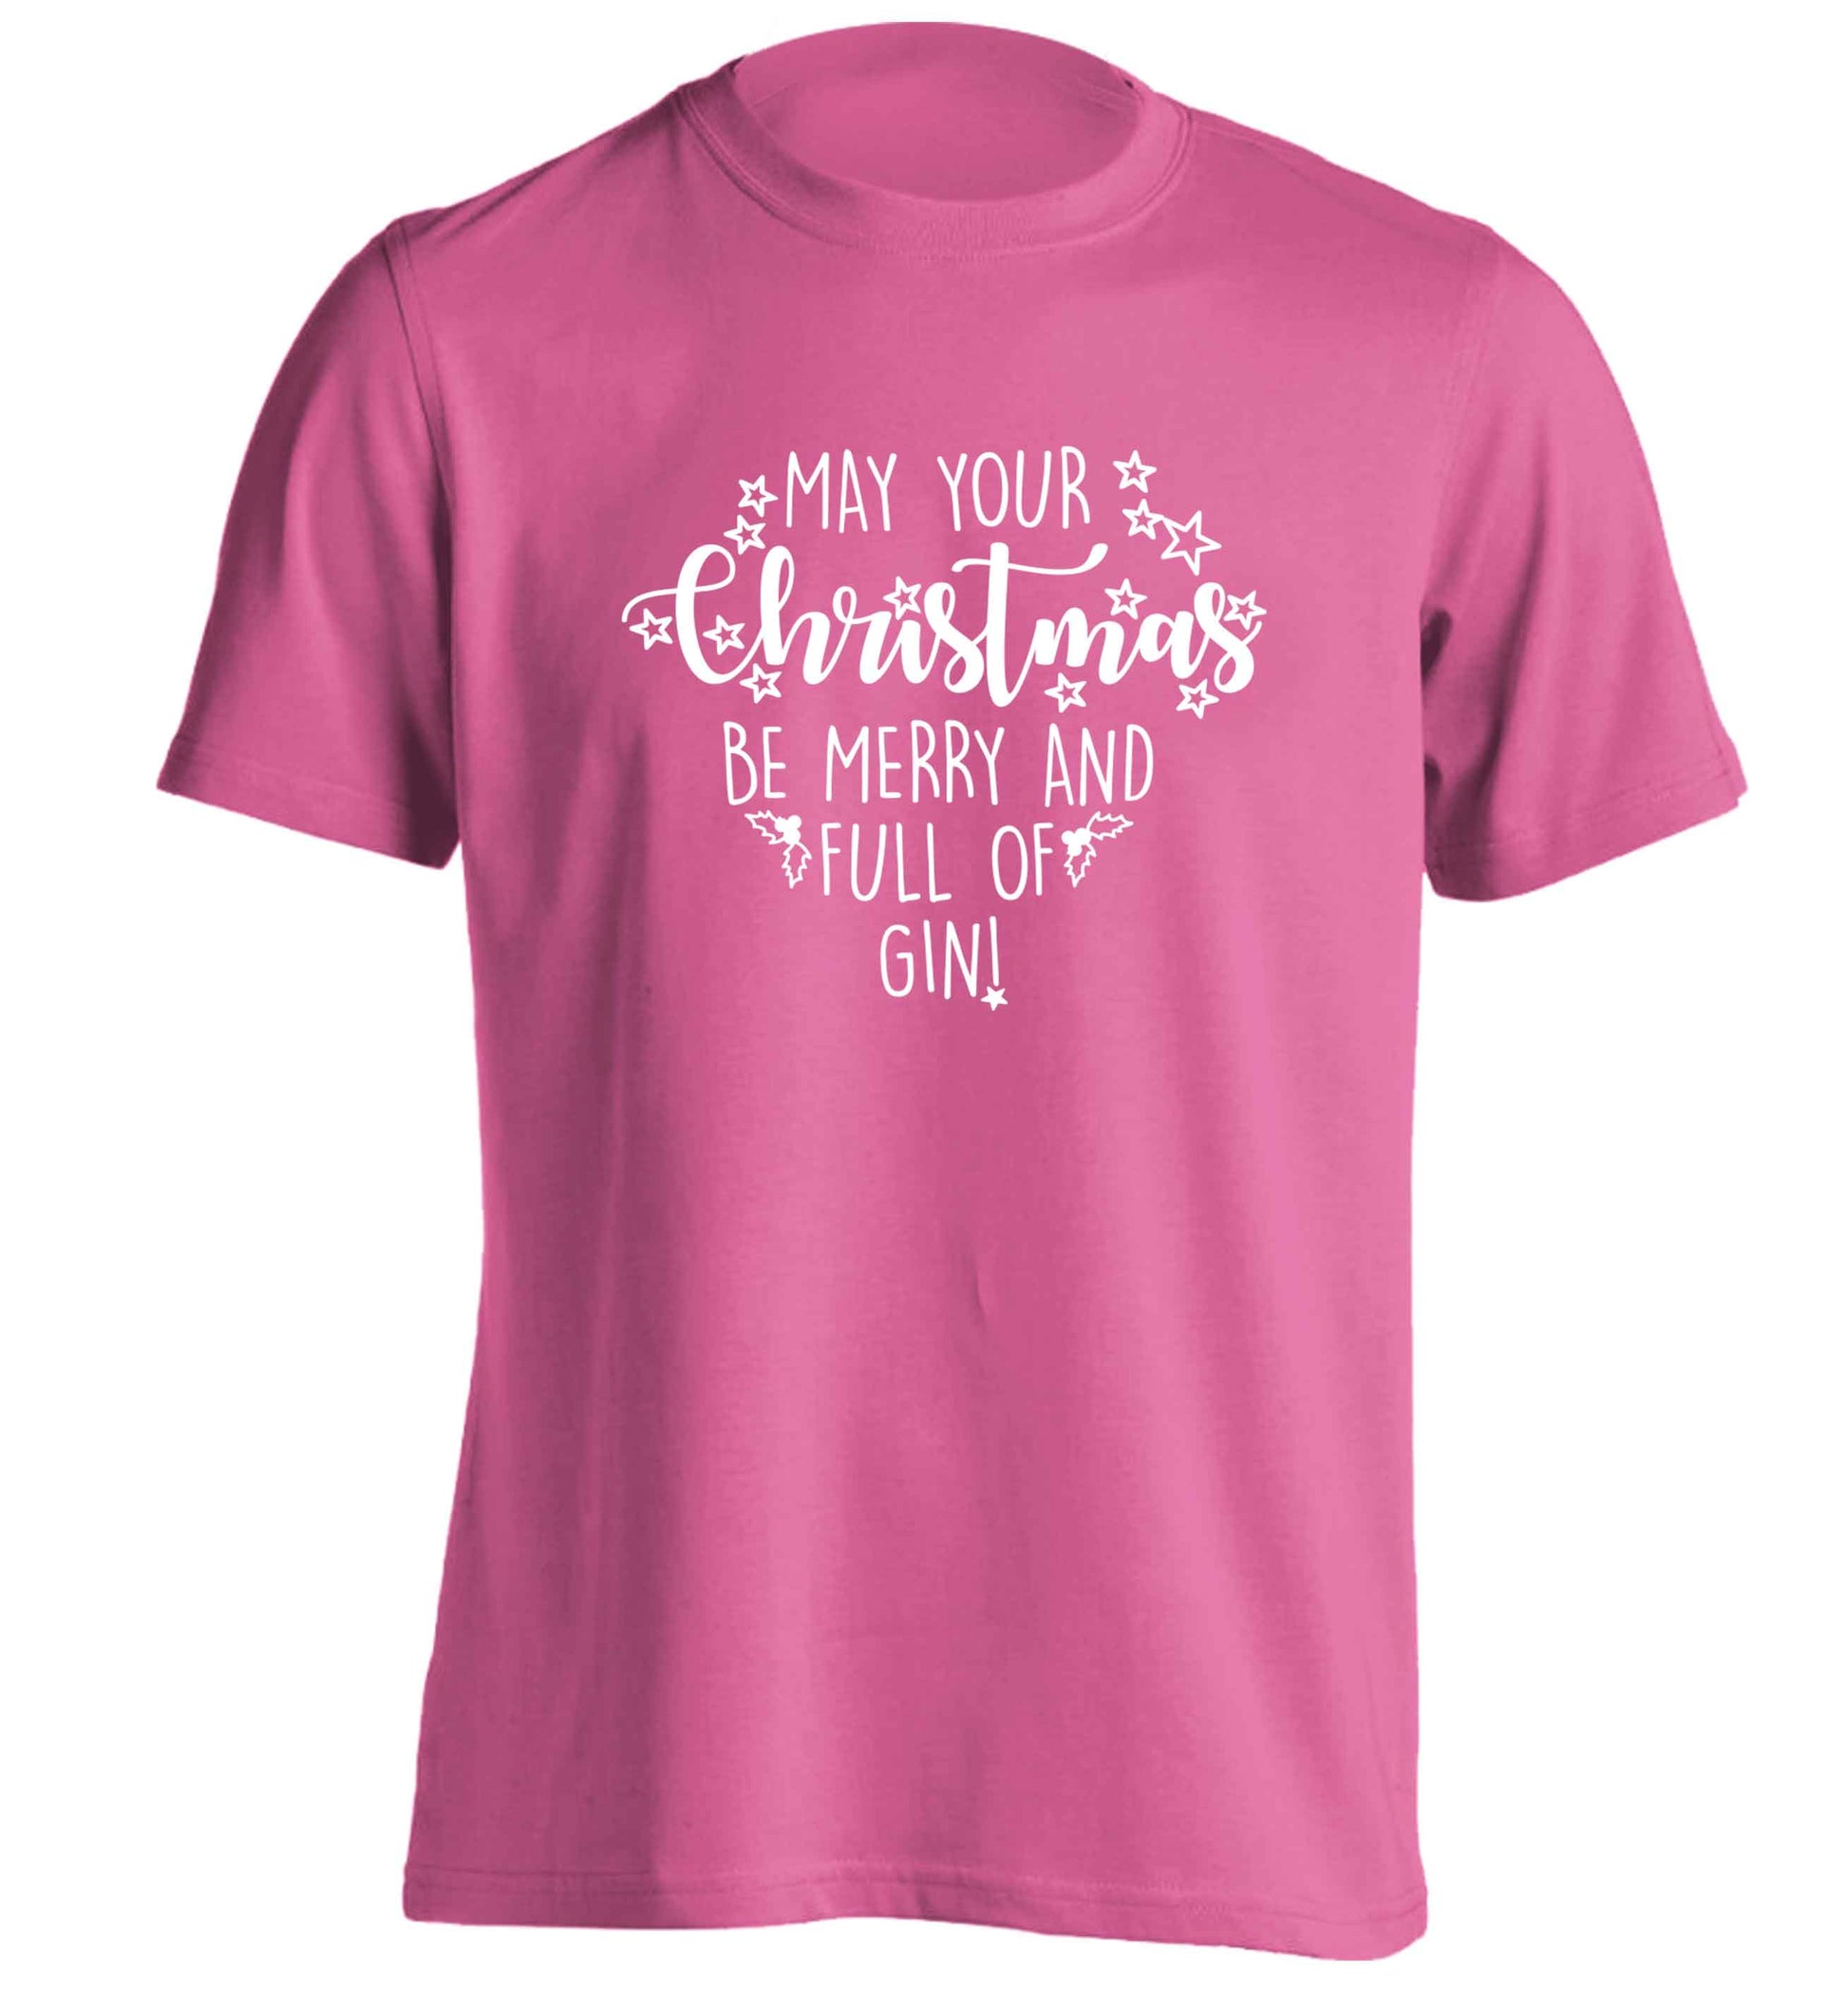 May your Christmas be merry and full of gin adults unisex pink Tshirt 2XL